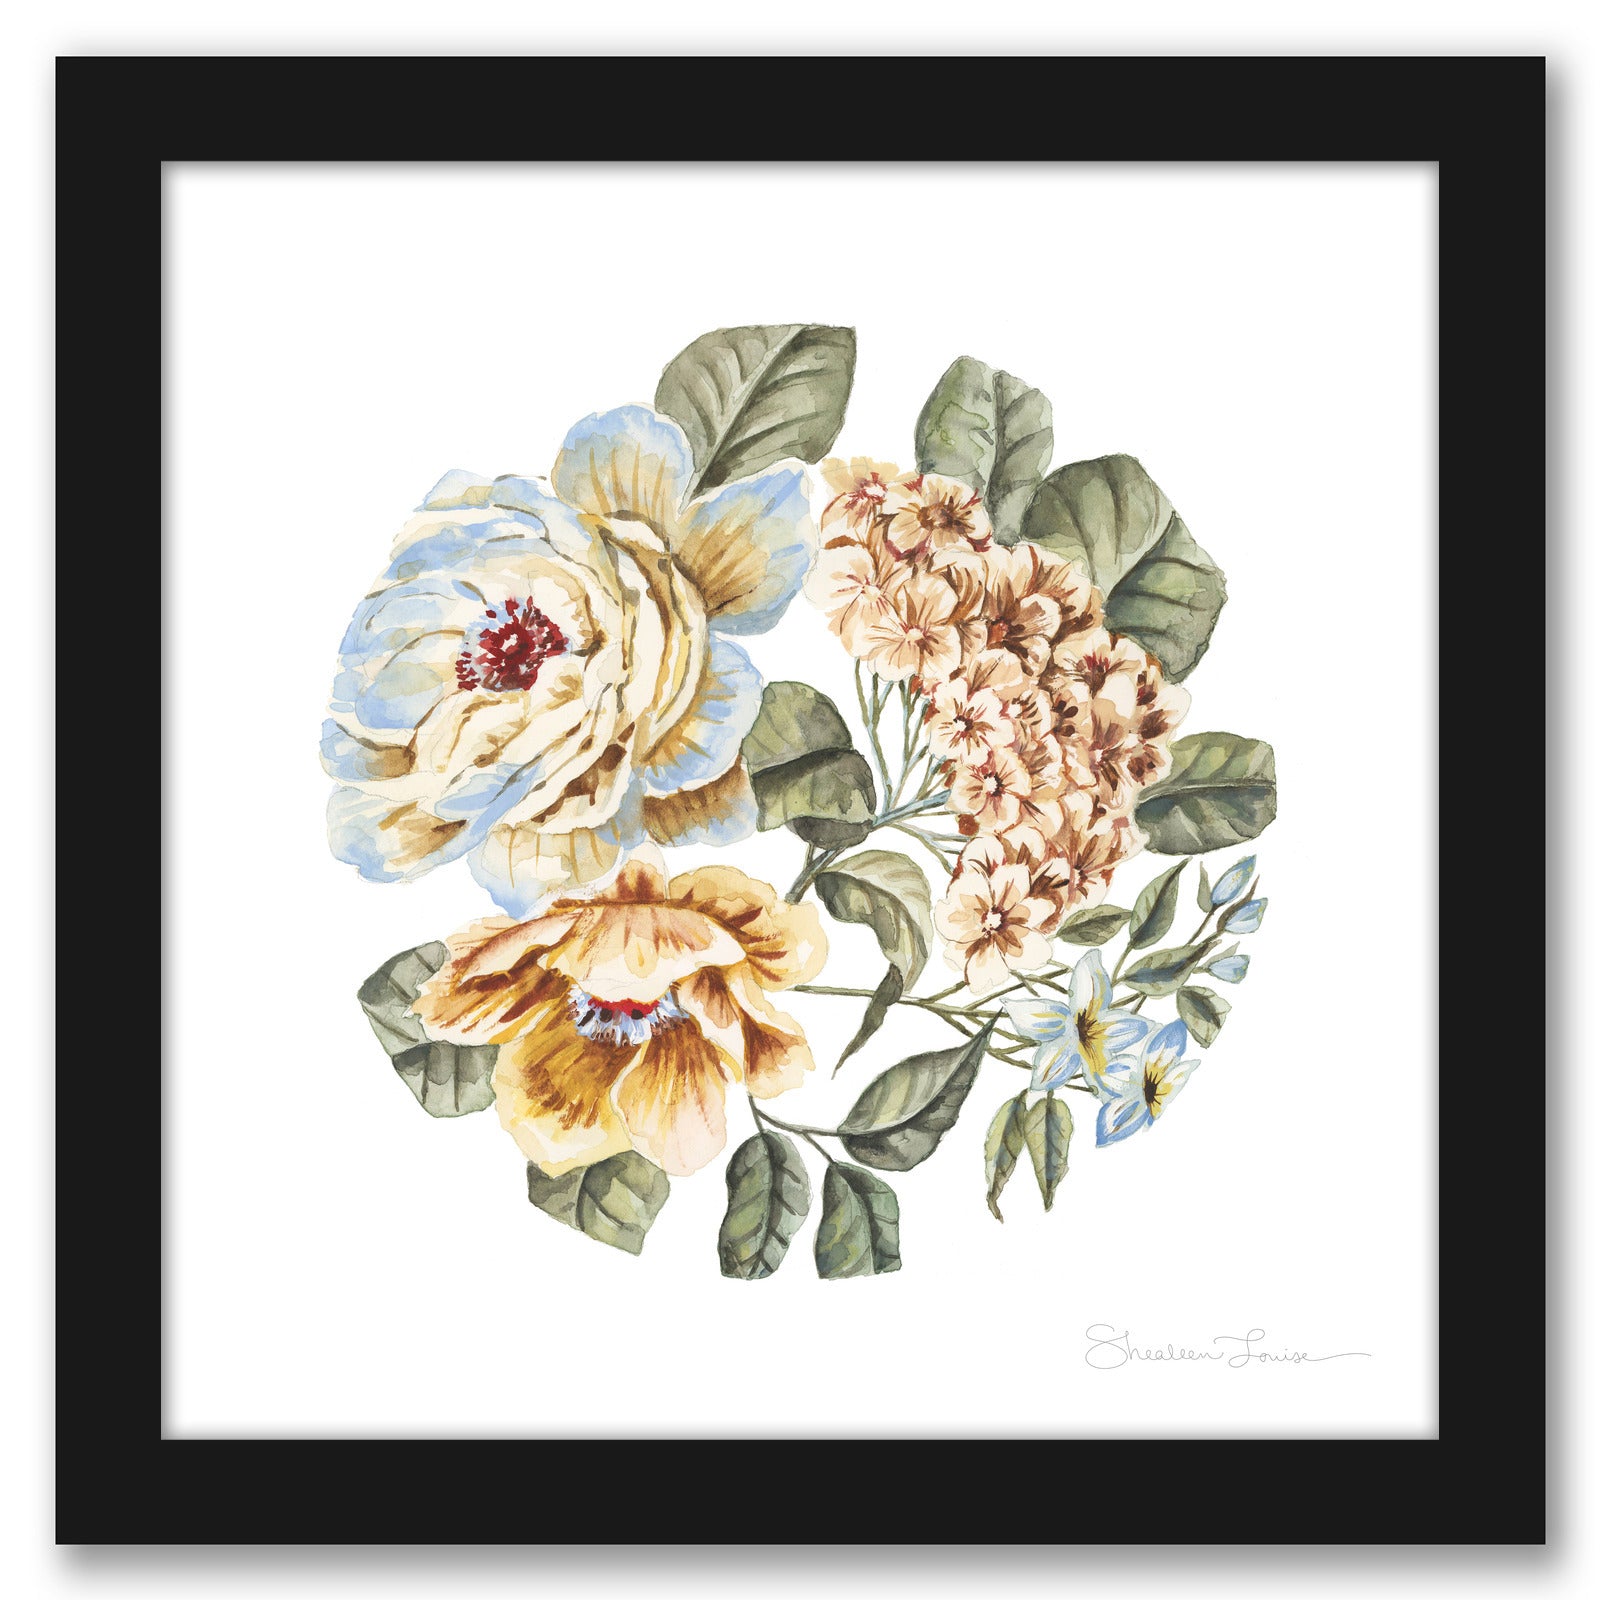 Circular Pastel Florals by Shealeen Louise - Framed Print